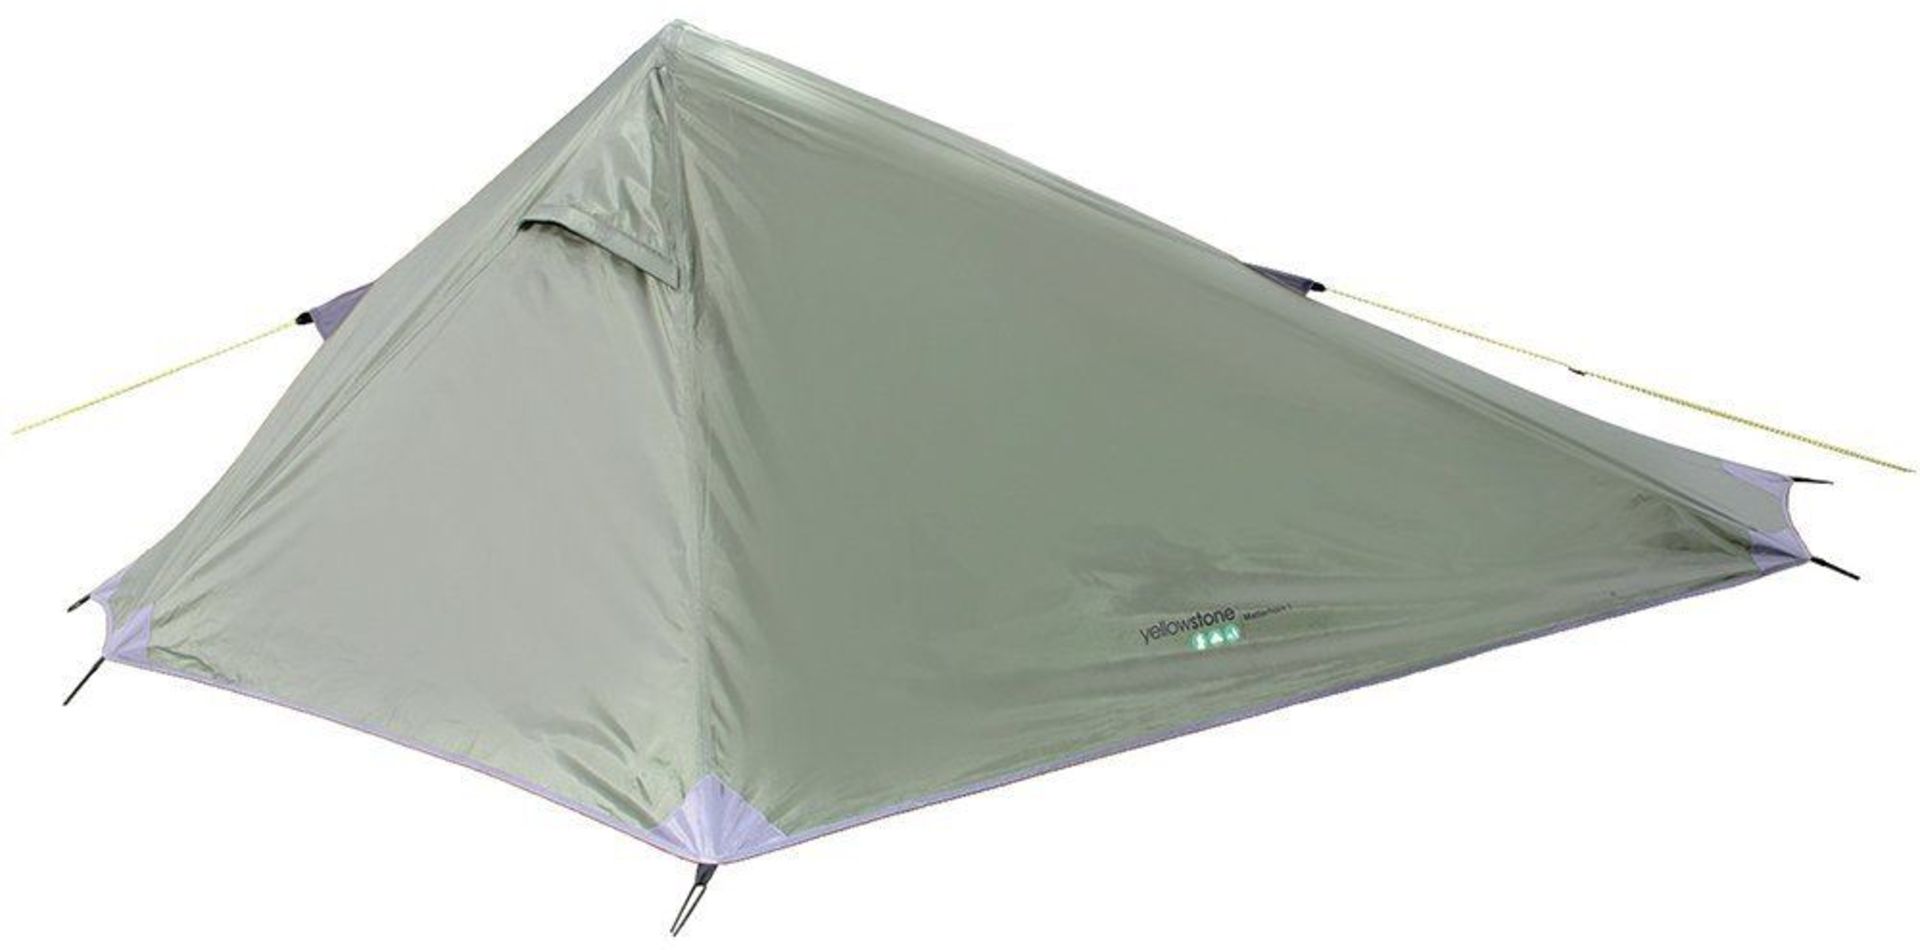 V Brand New Two Person Lightweight Tent In Bag - Easy to Pitch - Sewn in Groundsheet - Pre- - Image 2 of 2